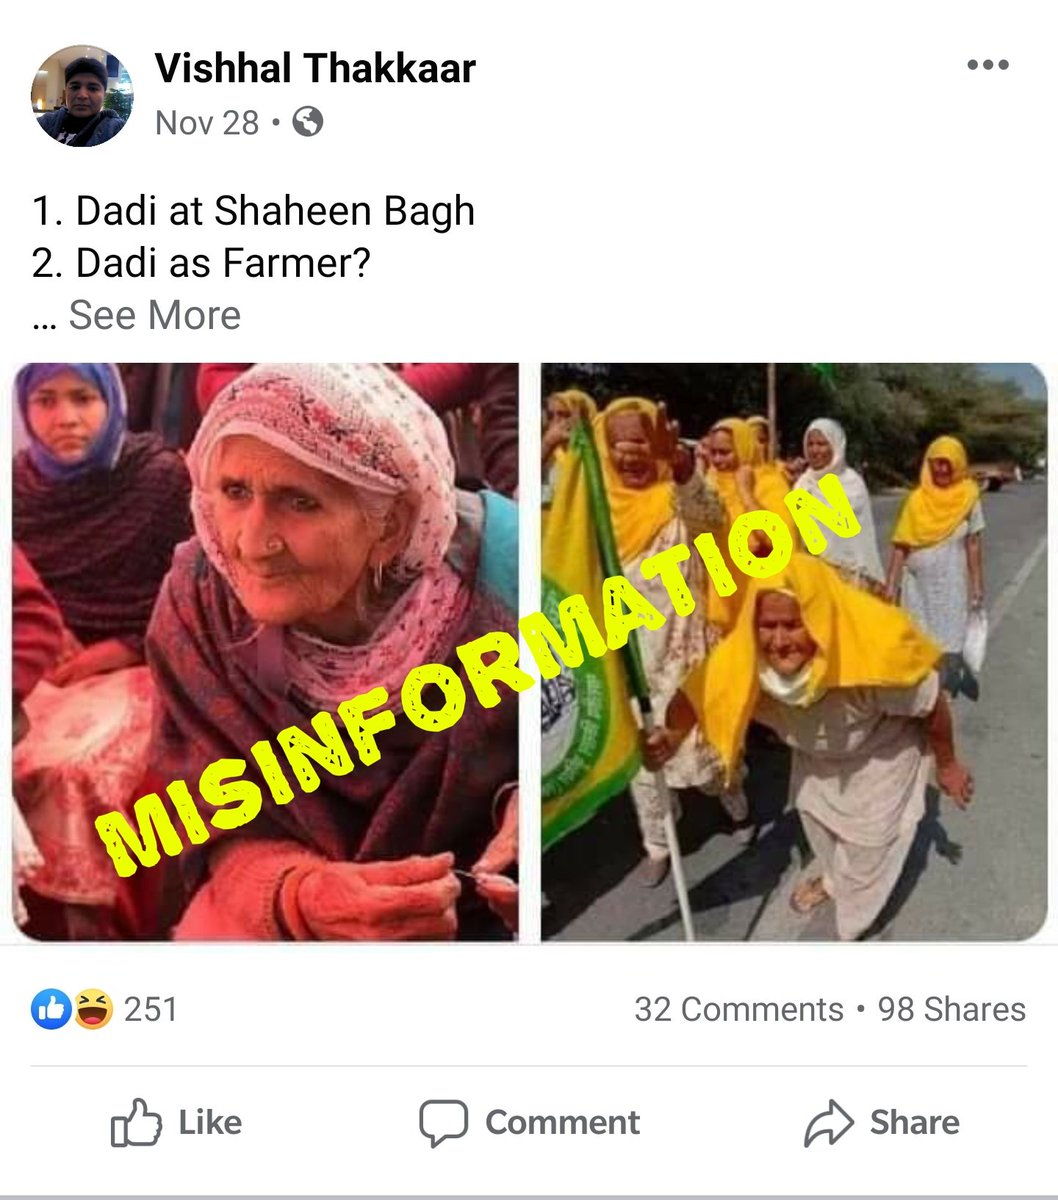 A photo of an elderly woman participating in a farmers' protest in Punjab in October was shared with the false claim that she is 'Shaheen Bagh Dadi' Bilkis Bano who was present in the recent farmers' protest.  #AltNewsFactCheck 3/n  https://www.altnews.in/shaheen-bagh-dadi-at-recent-farmers-protest-no-photo-of-elderly-woman-from-october/?utm_source=website&utm_medium=social-media&utm_campaign=newpost